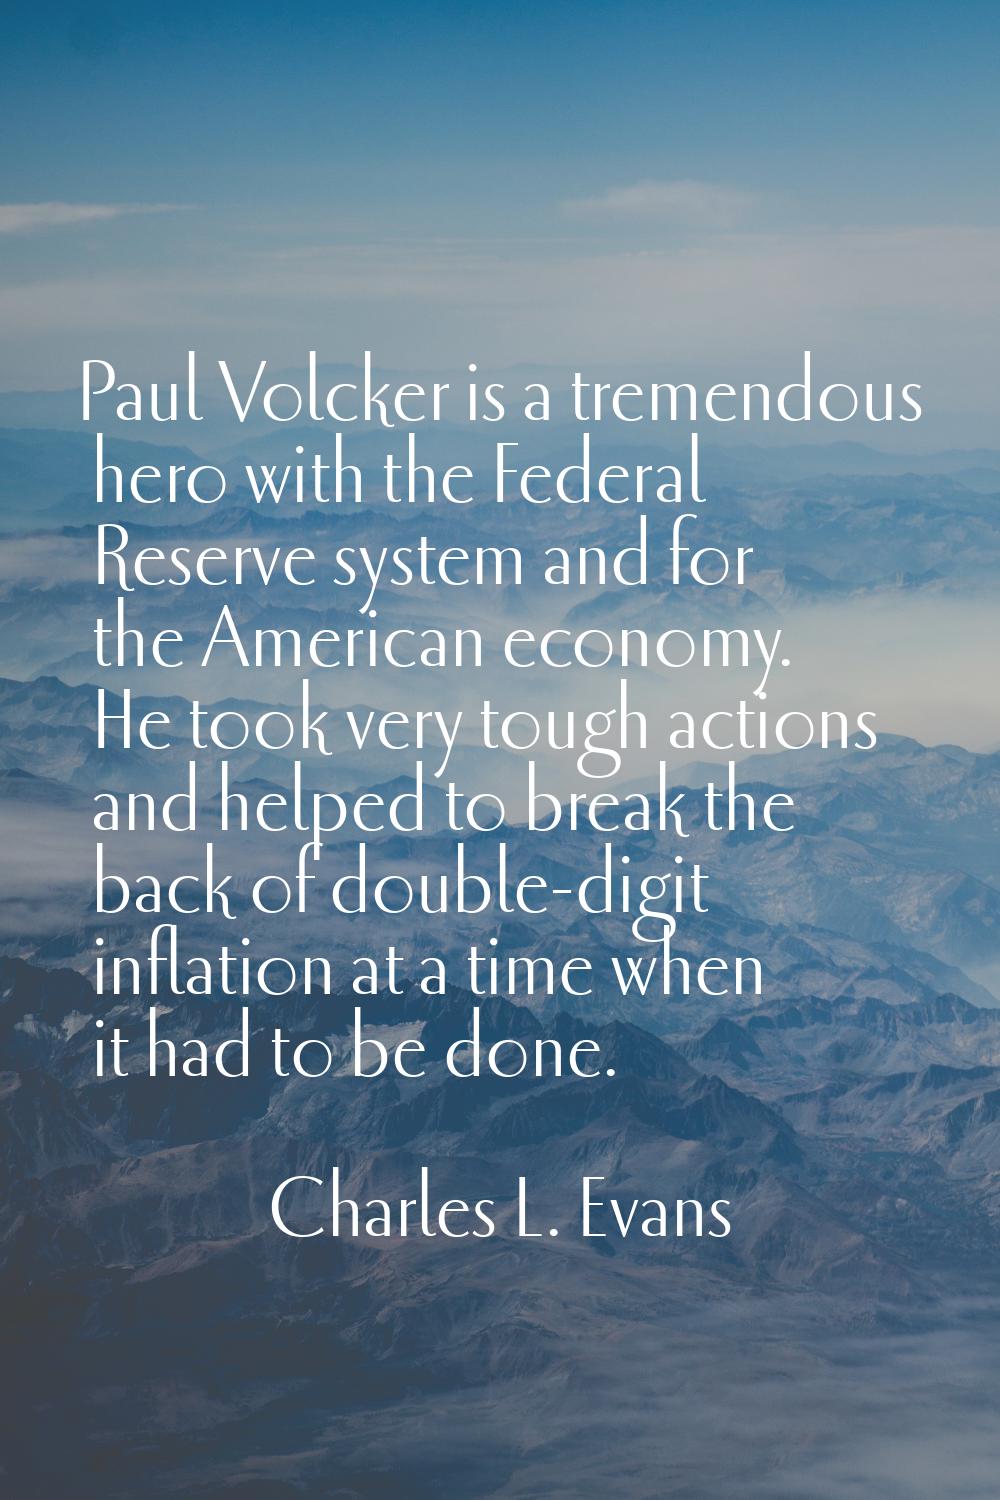 Paul Volcker is a tremendous hero with the Federal Reserve system and for the American economy. He 